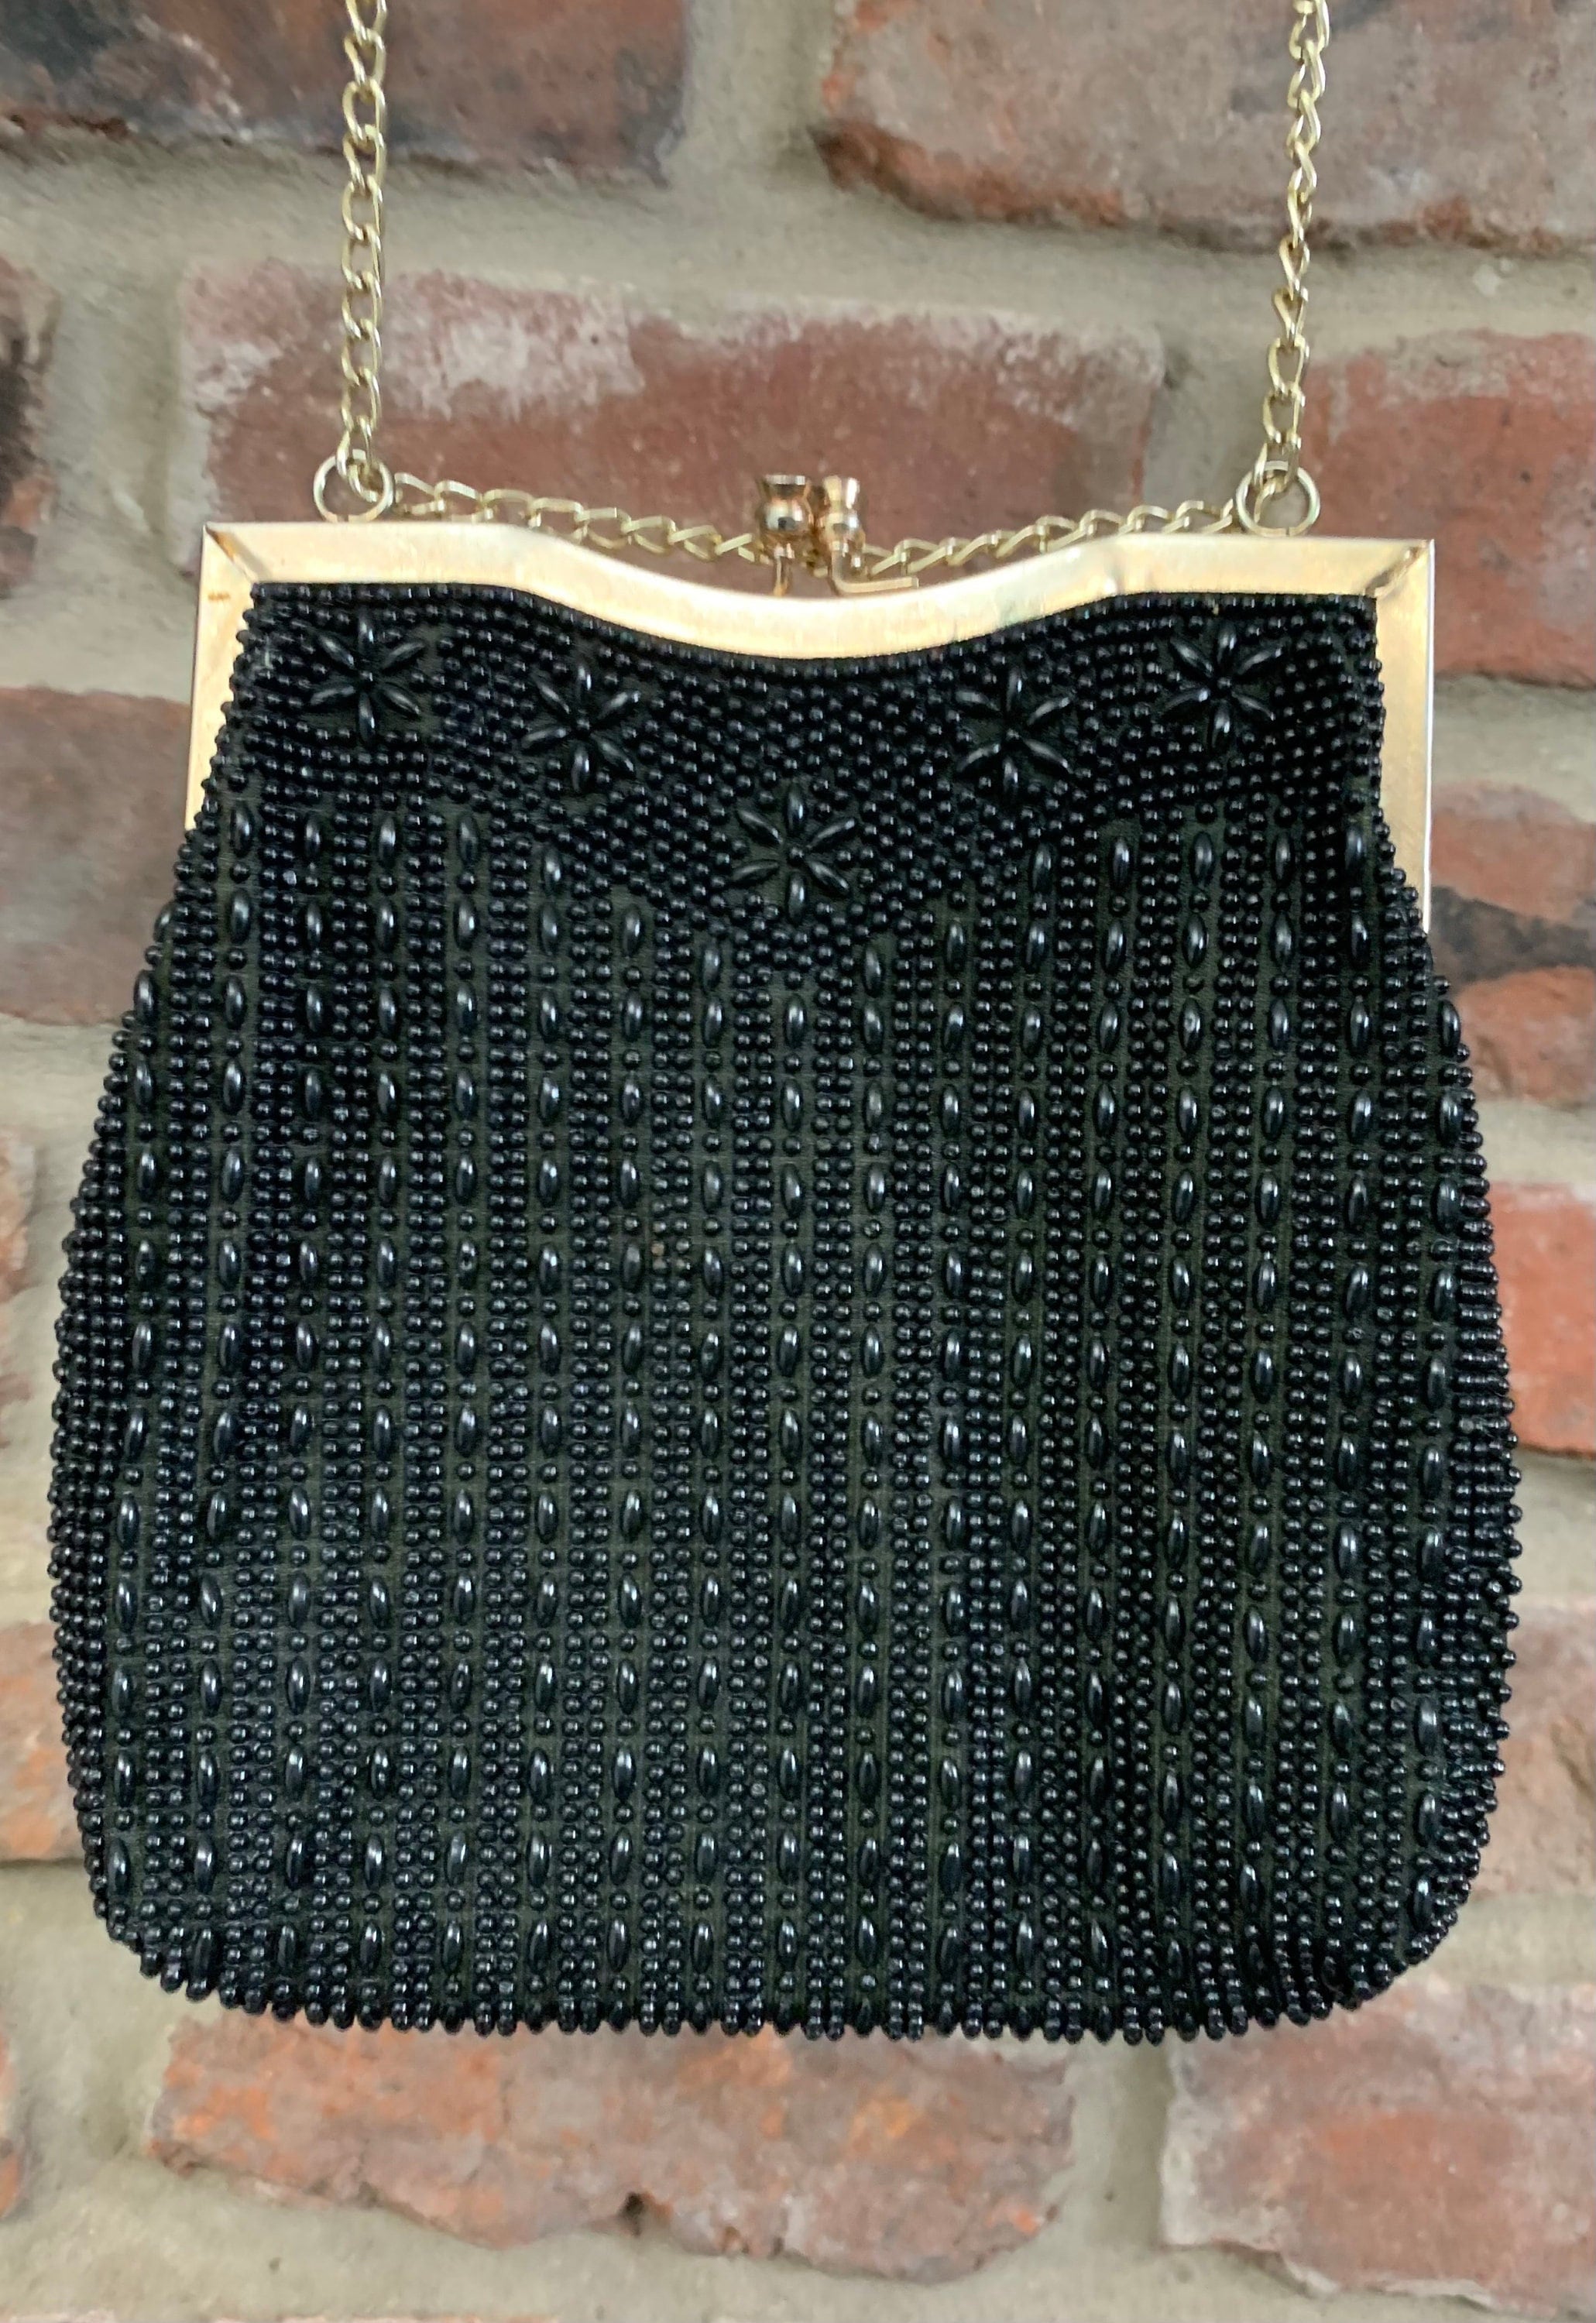 Beaded Mini Purse Vintage Y2K Goth Glam Made in Hong Kong